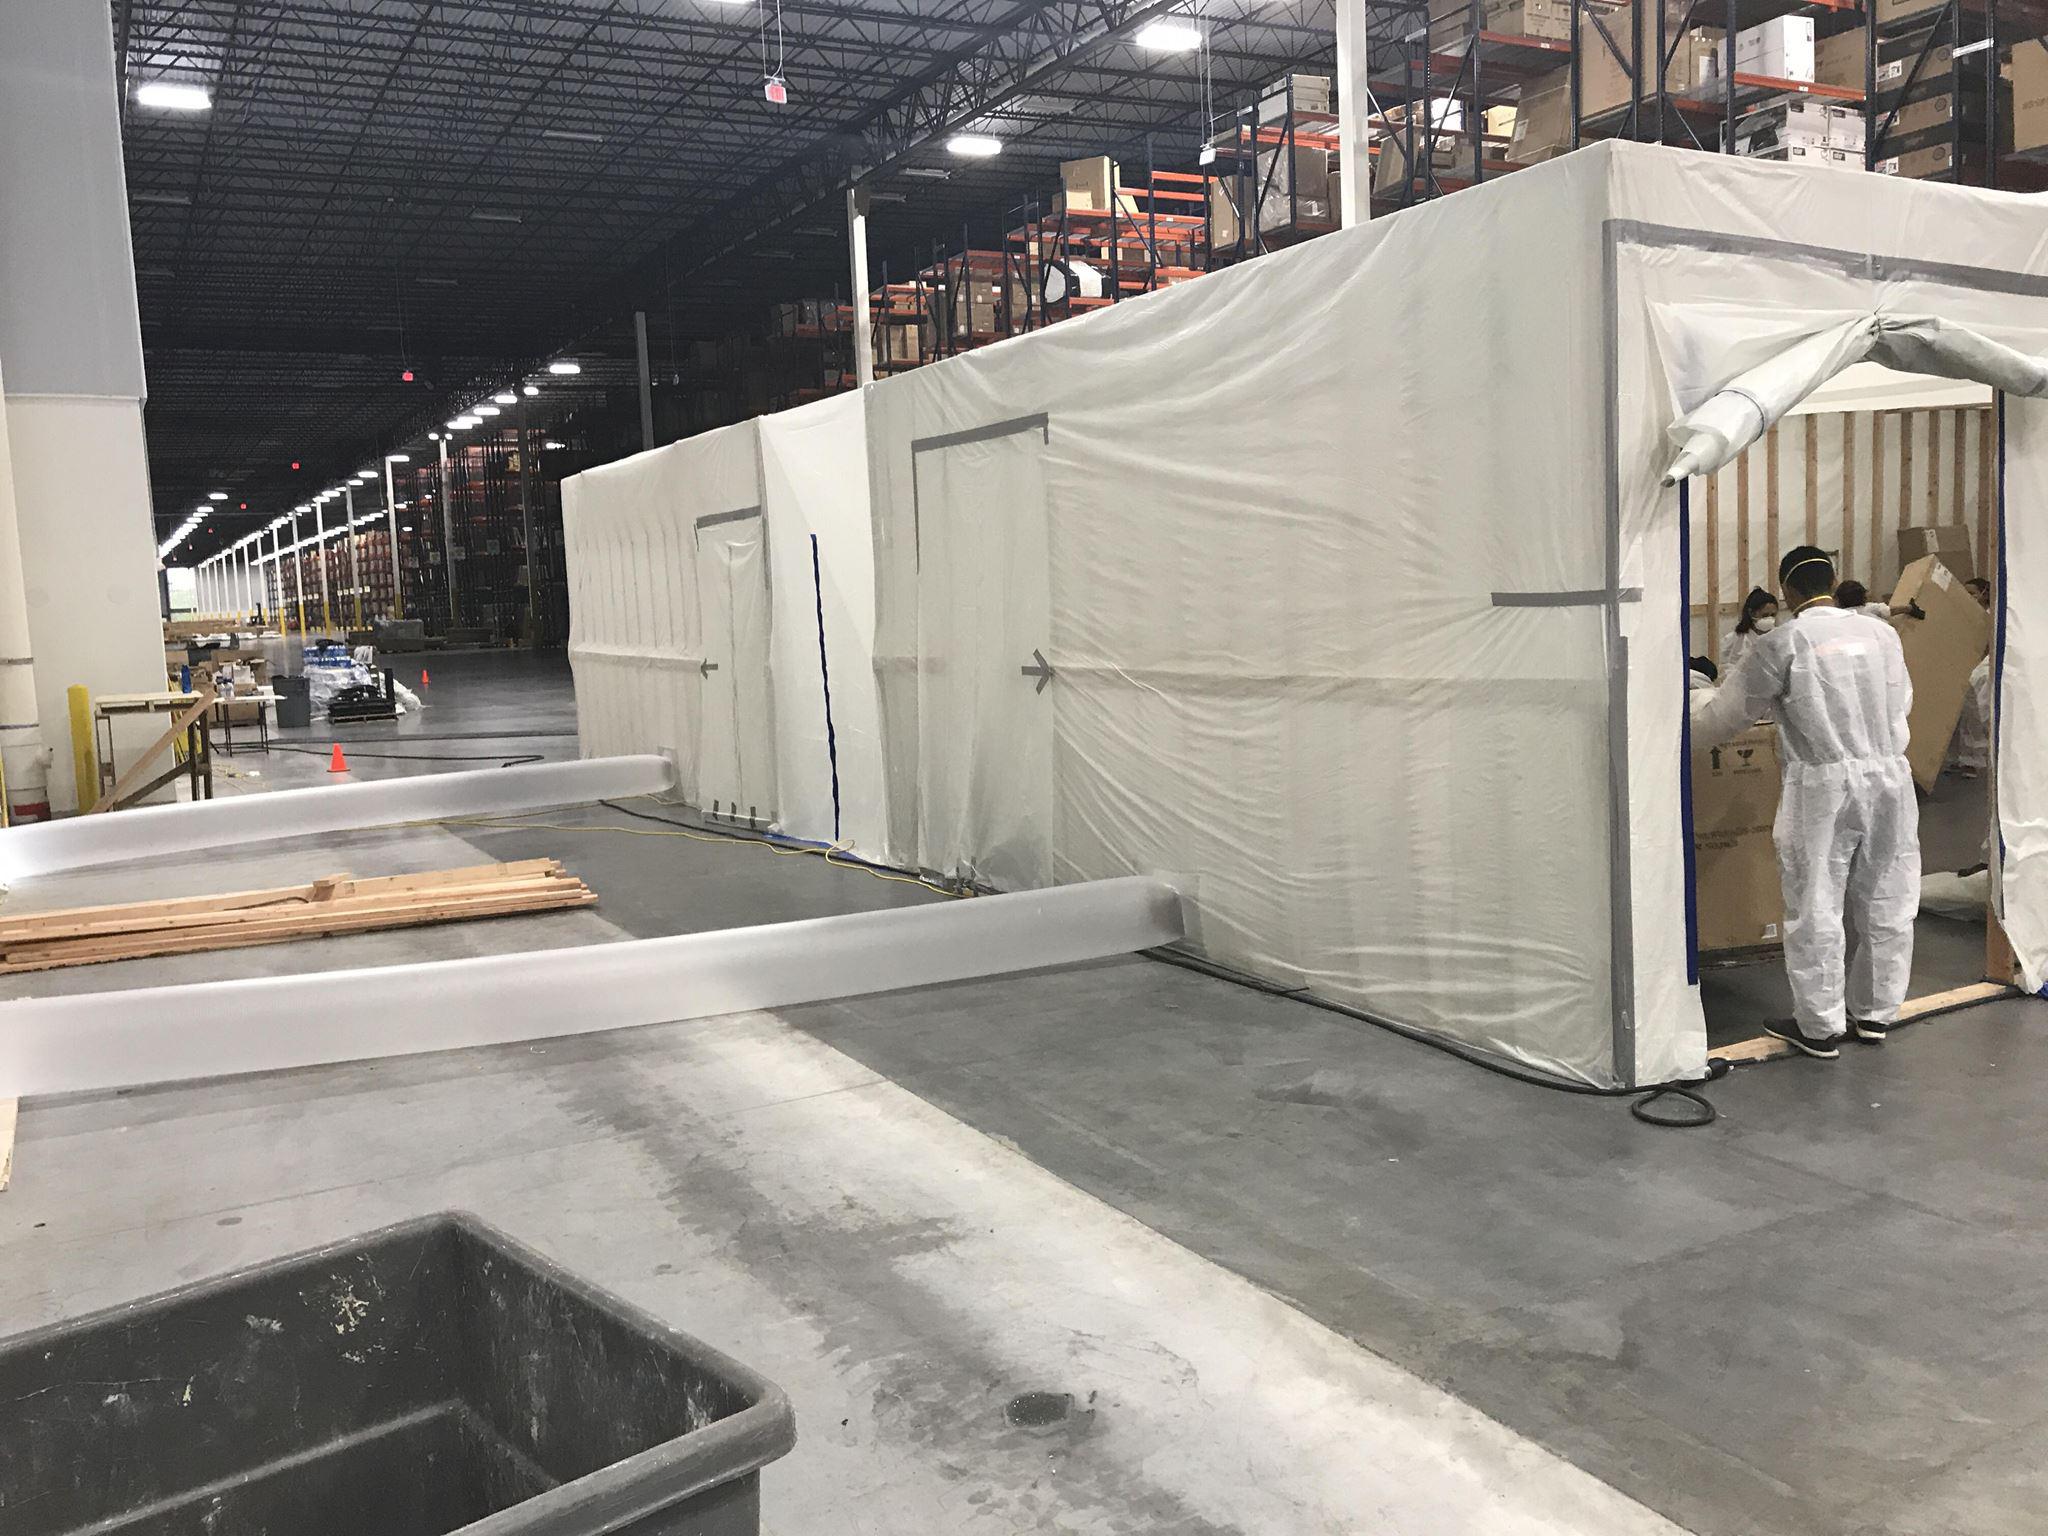 SERVPRO crew in the process of mold remediation services for large warehouse facility.